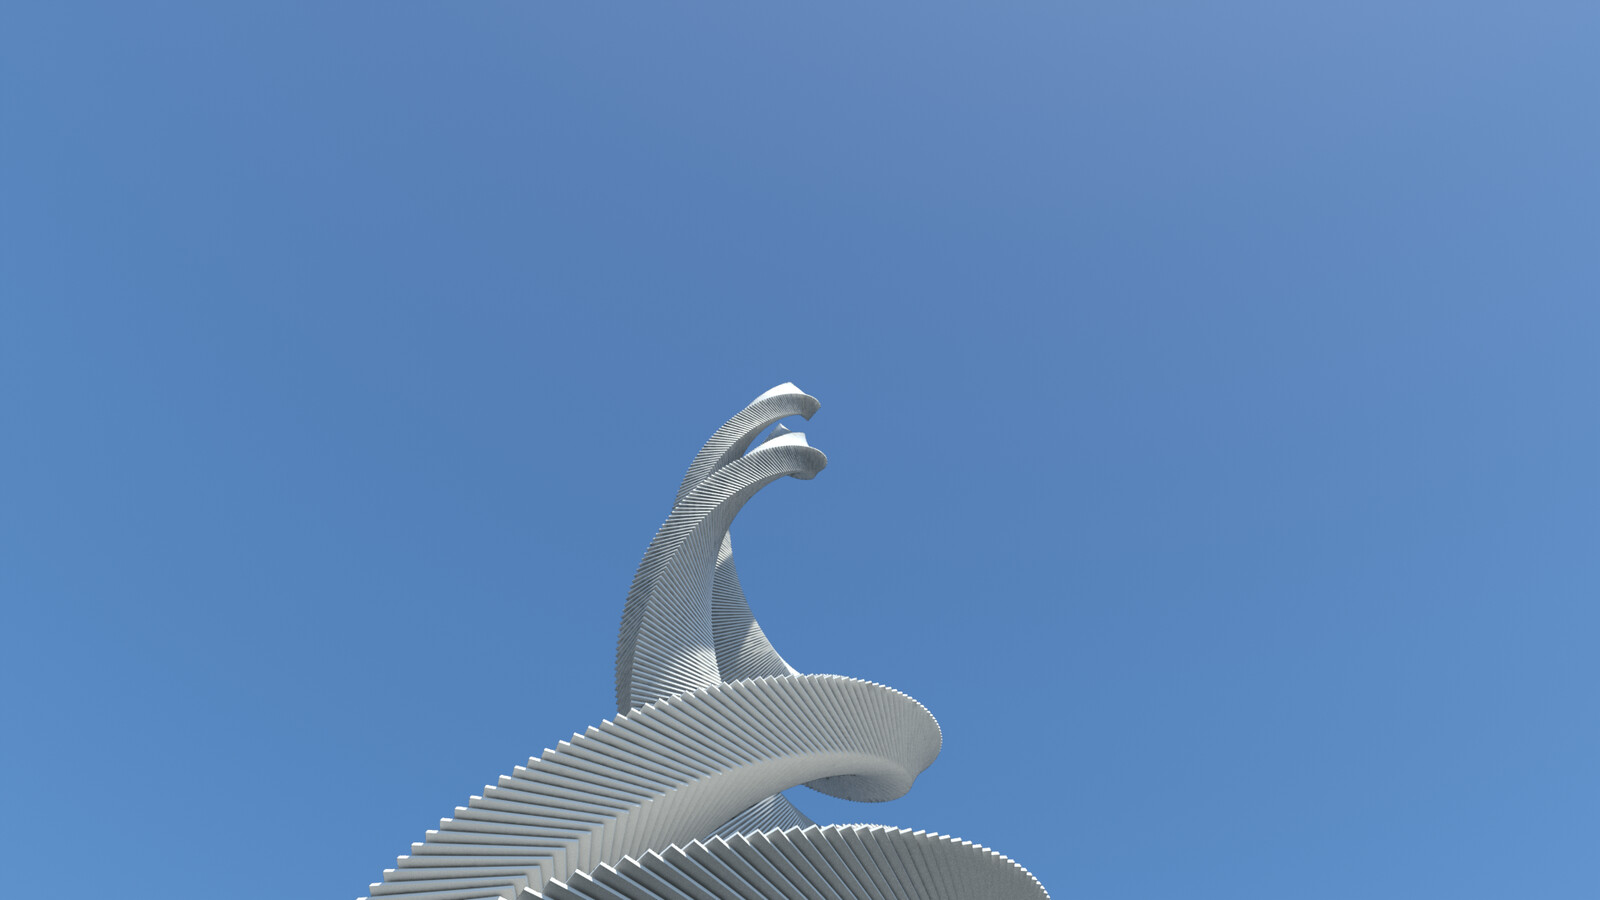 Procedurally-generated spiral towers - worm's eye view